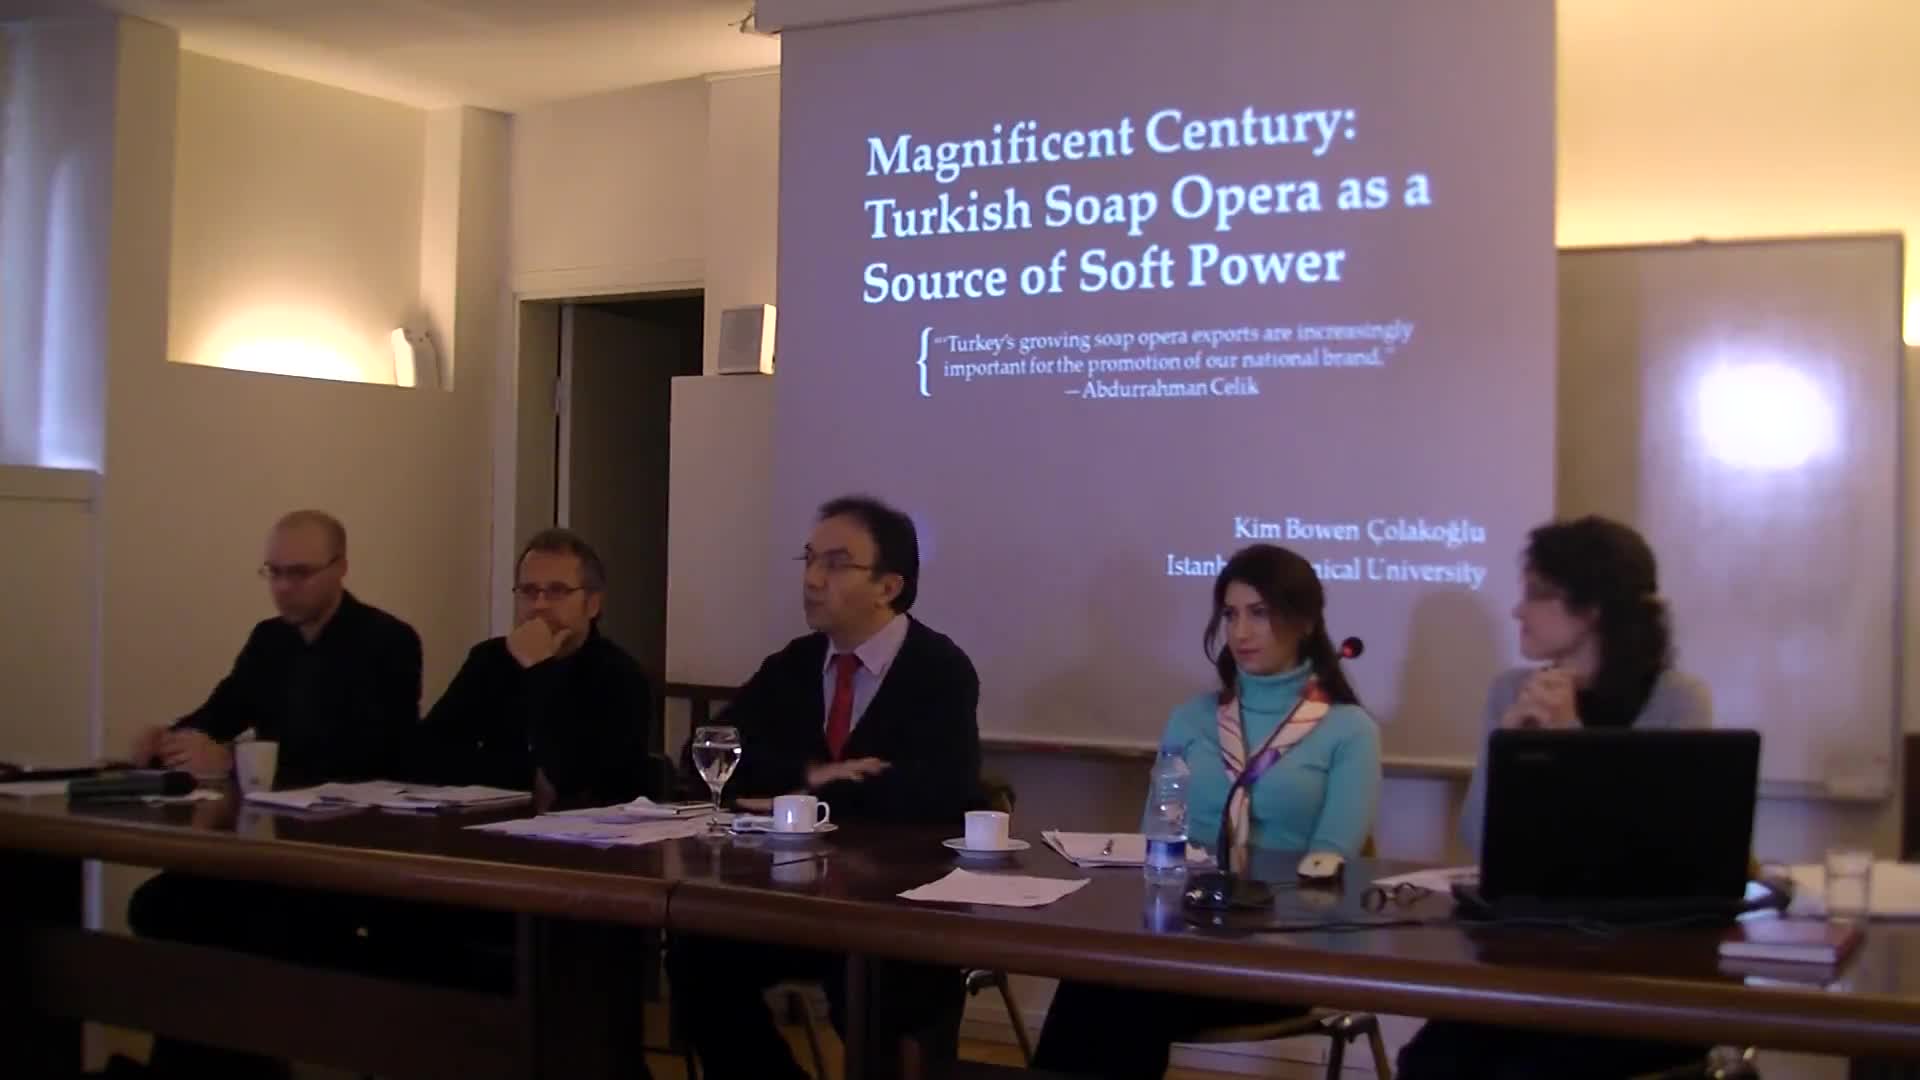 Magnificent Century: Turkish Soap Opera as a Source of Soft Power